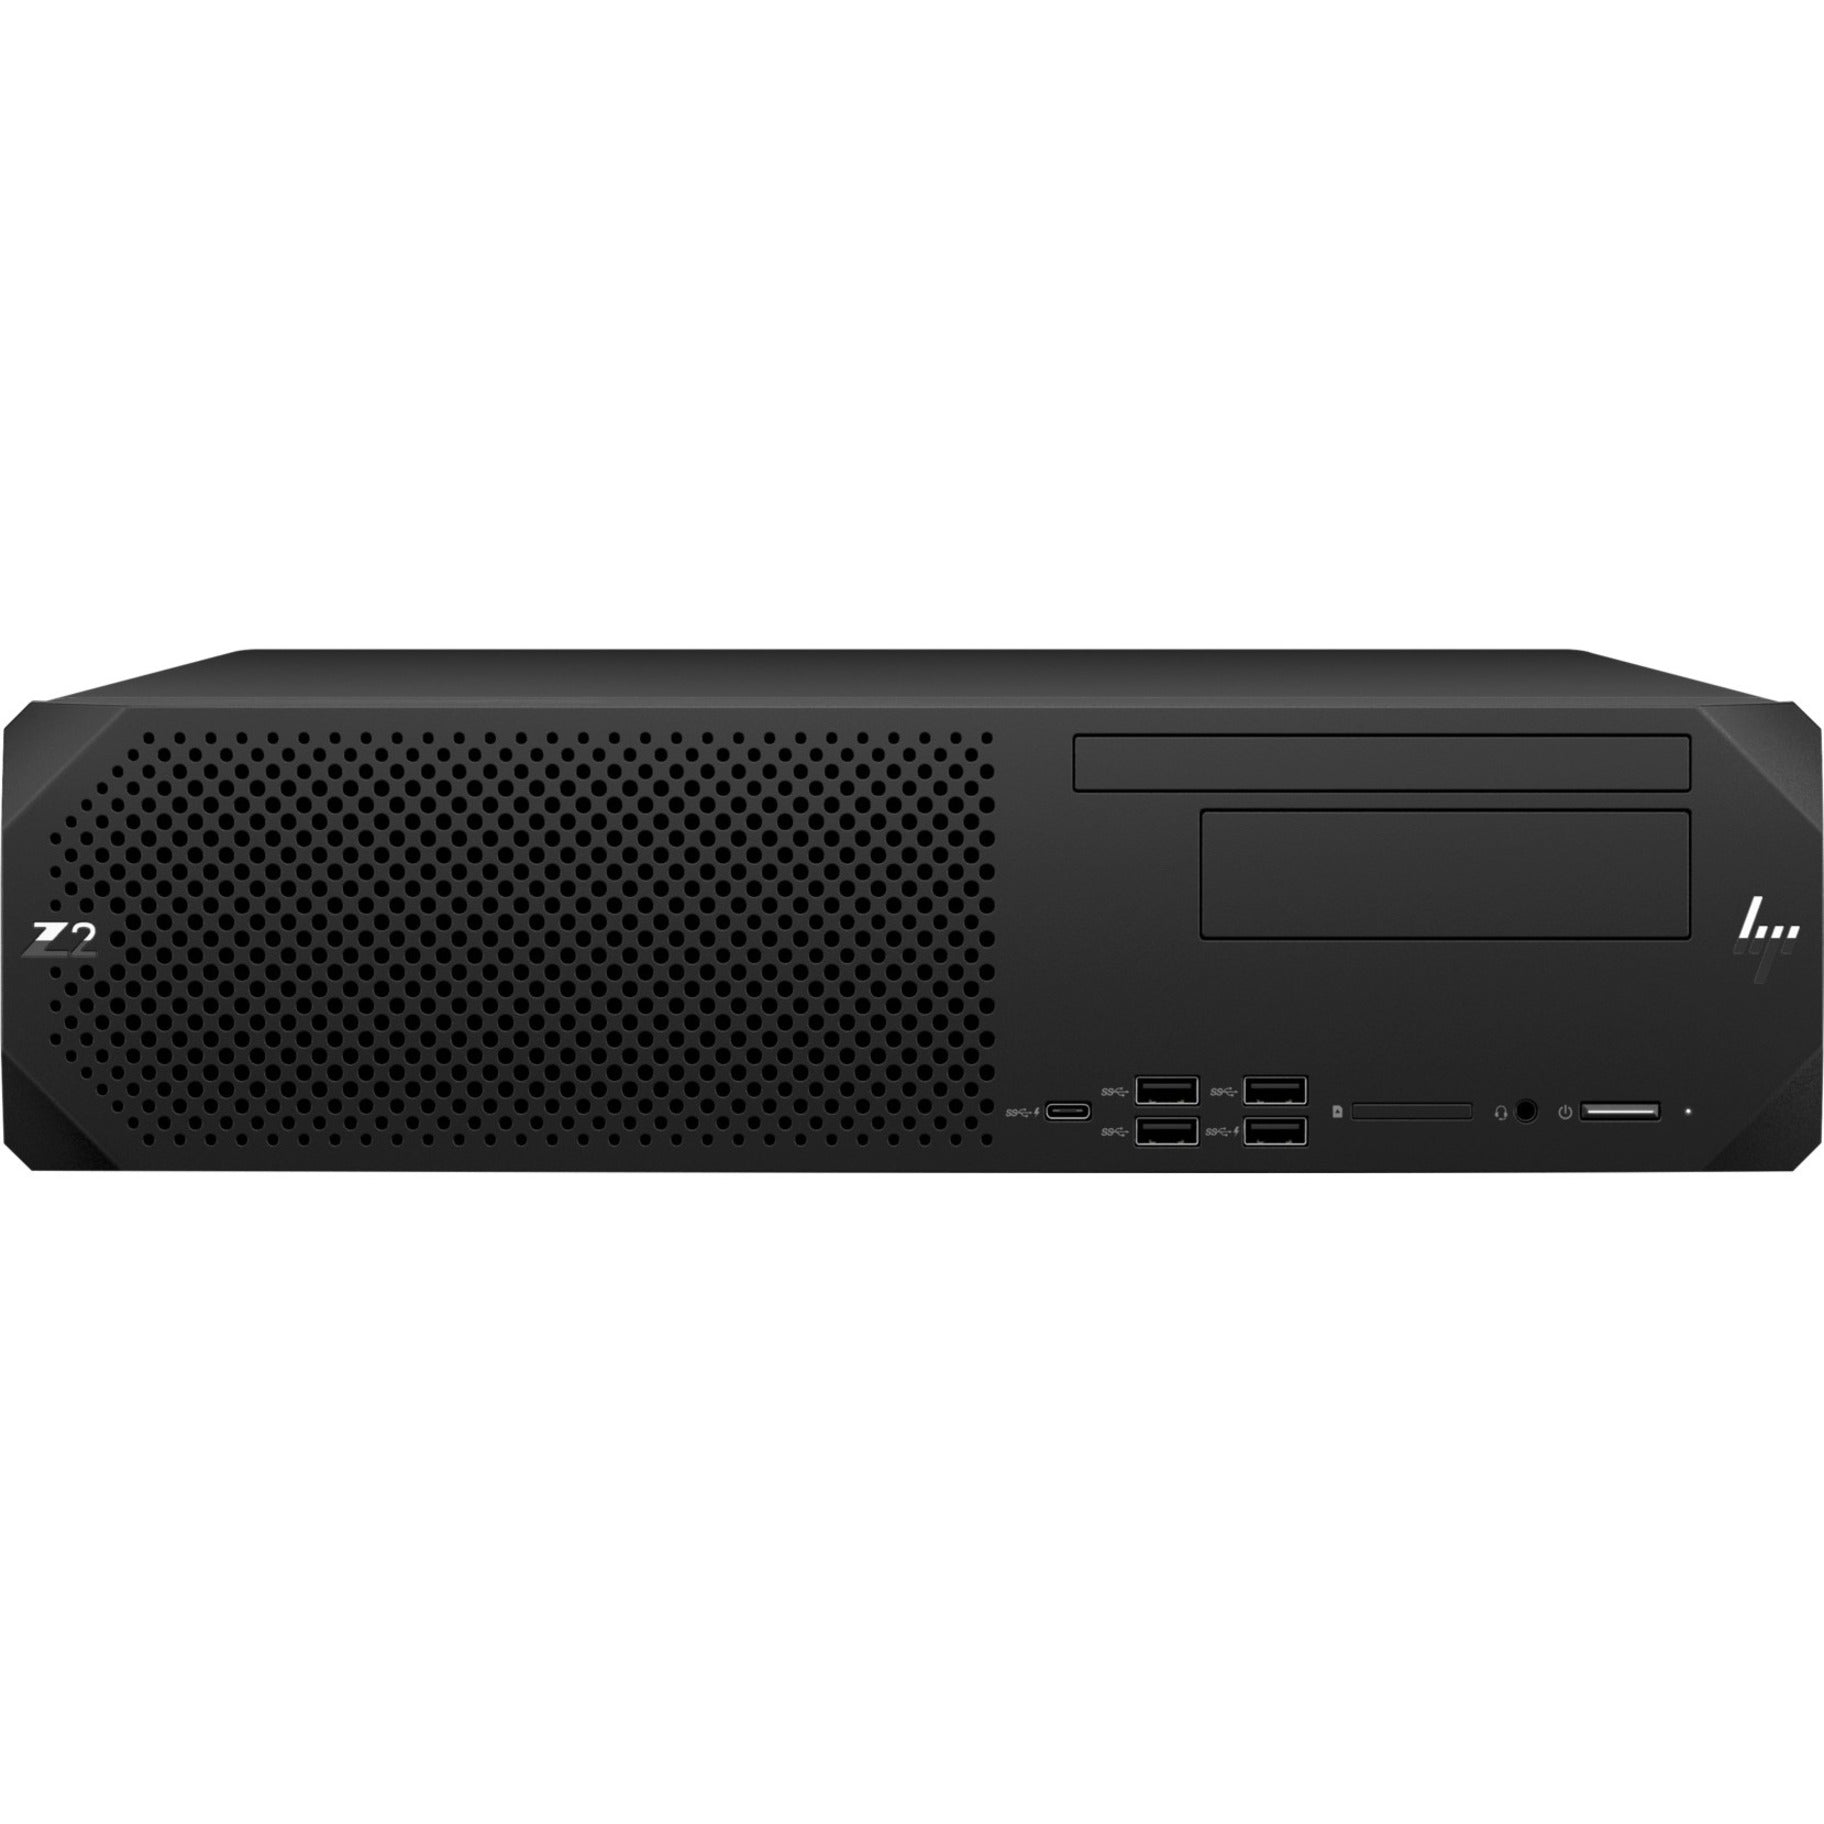 HP Z2 G9 Workstation - Intel Core i9 Hexadeca-core - 32GB RAM - 1TB SSD - Small Form Factor [Discontinued]